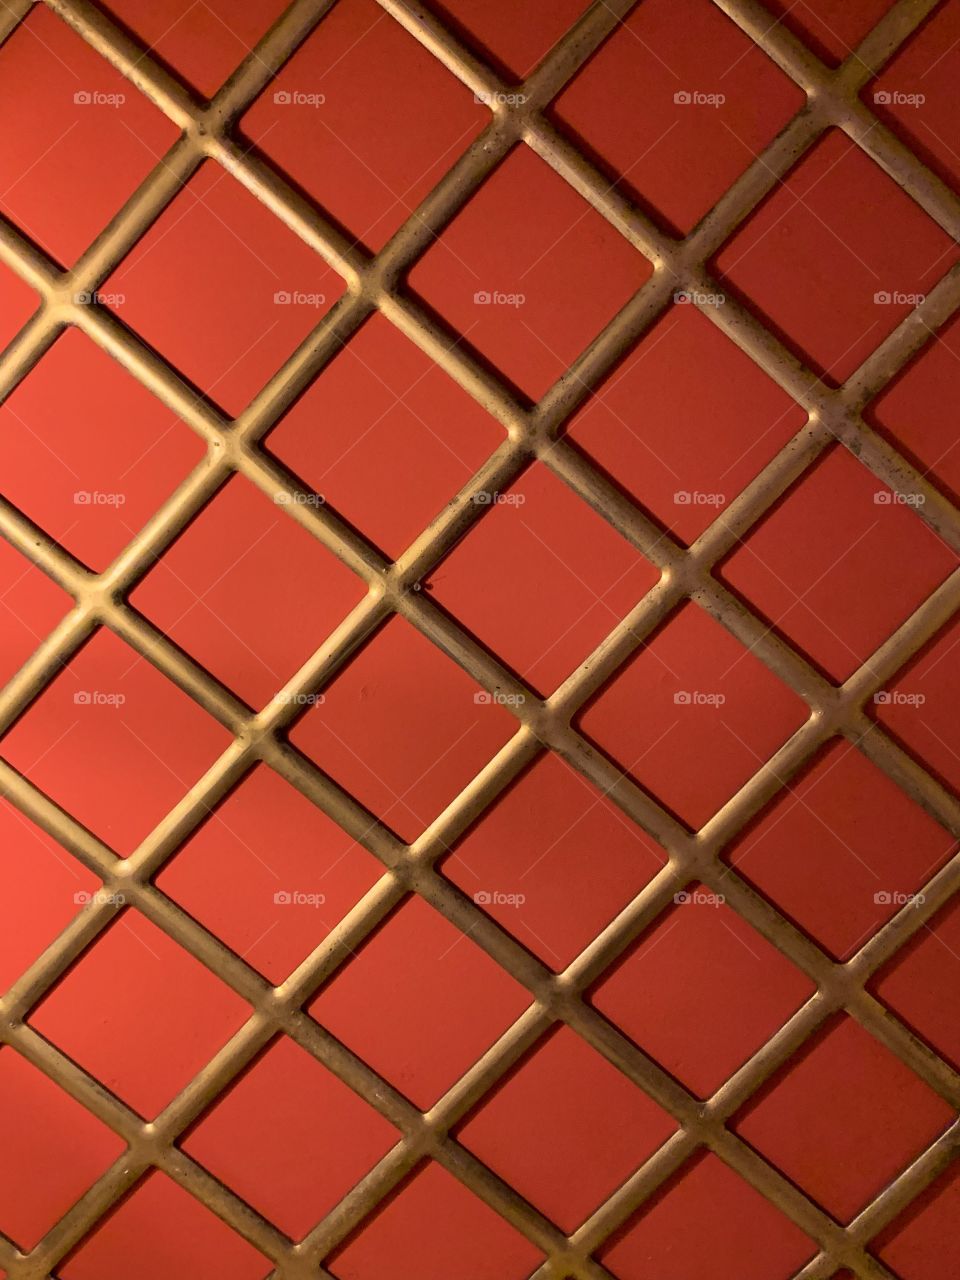 This roof was found in our local hotel. How beautiful is this pattern with all the squares?